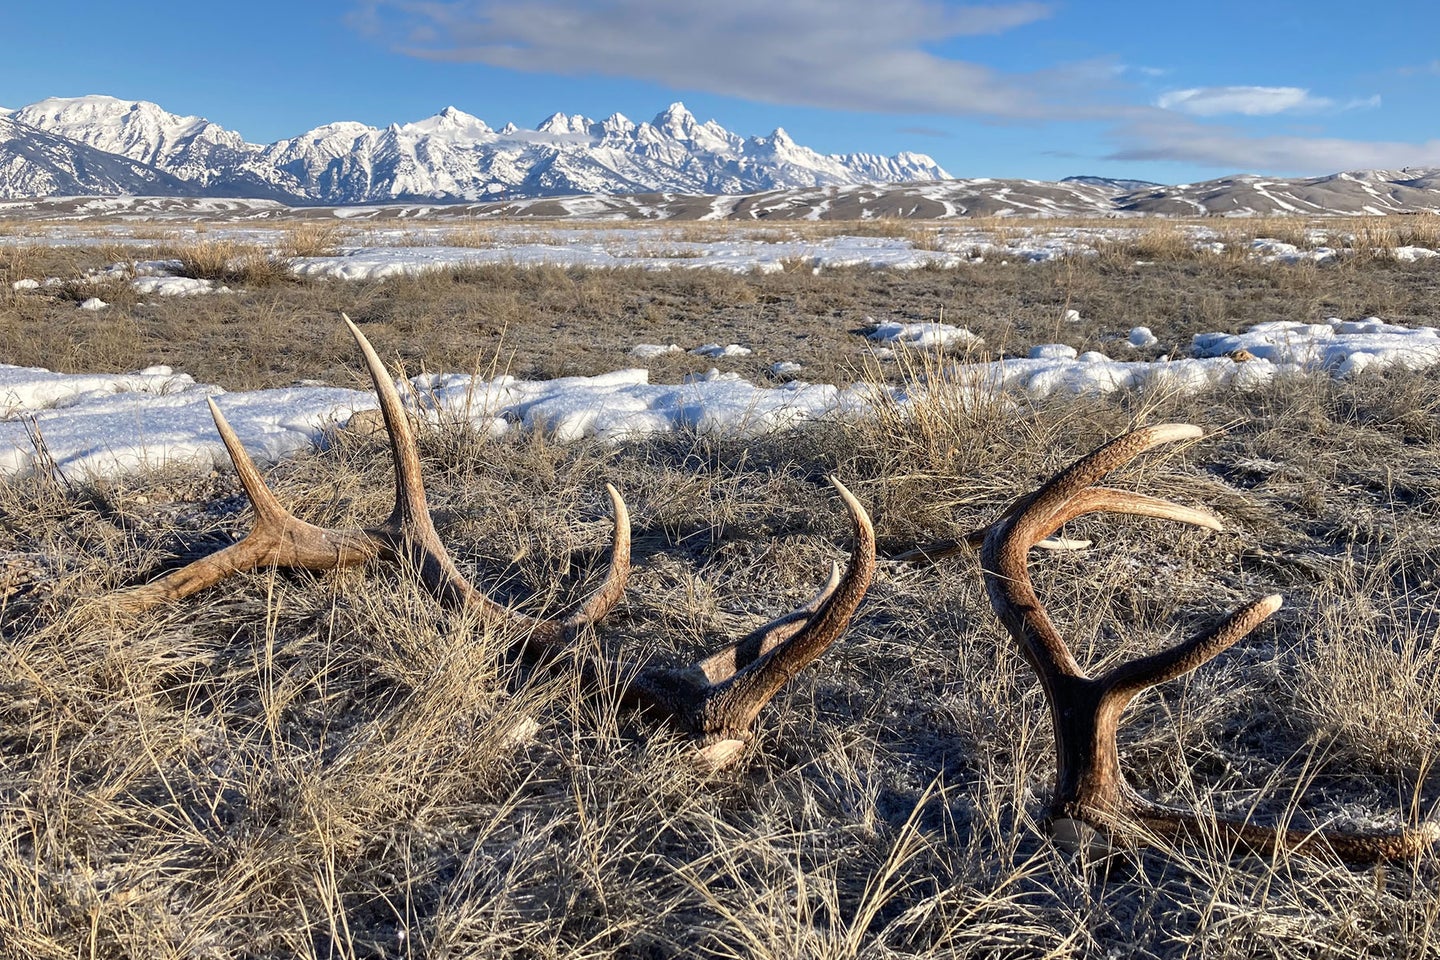 Illegally-collected shed antlers photographed by U.S. Fish & Wildlife agents.